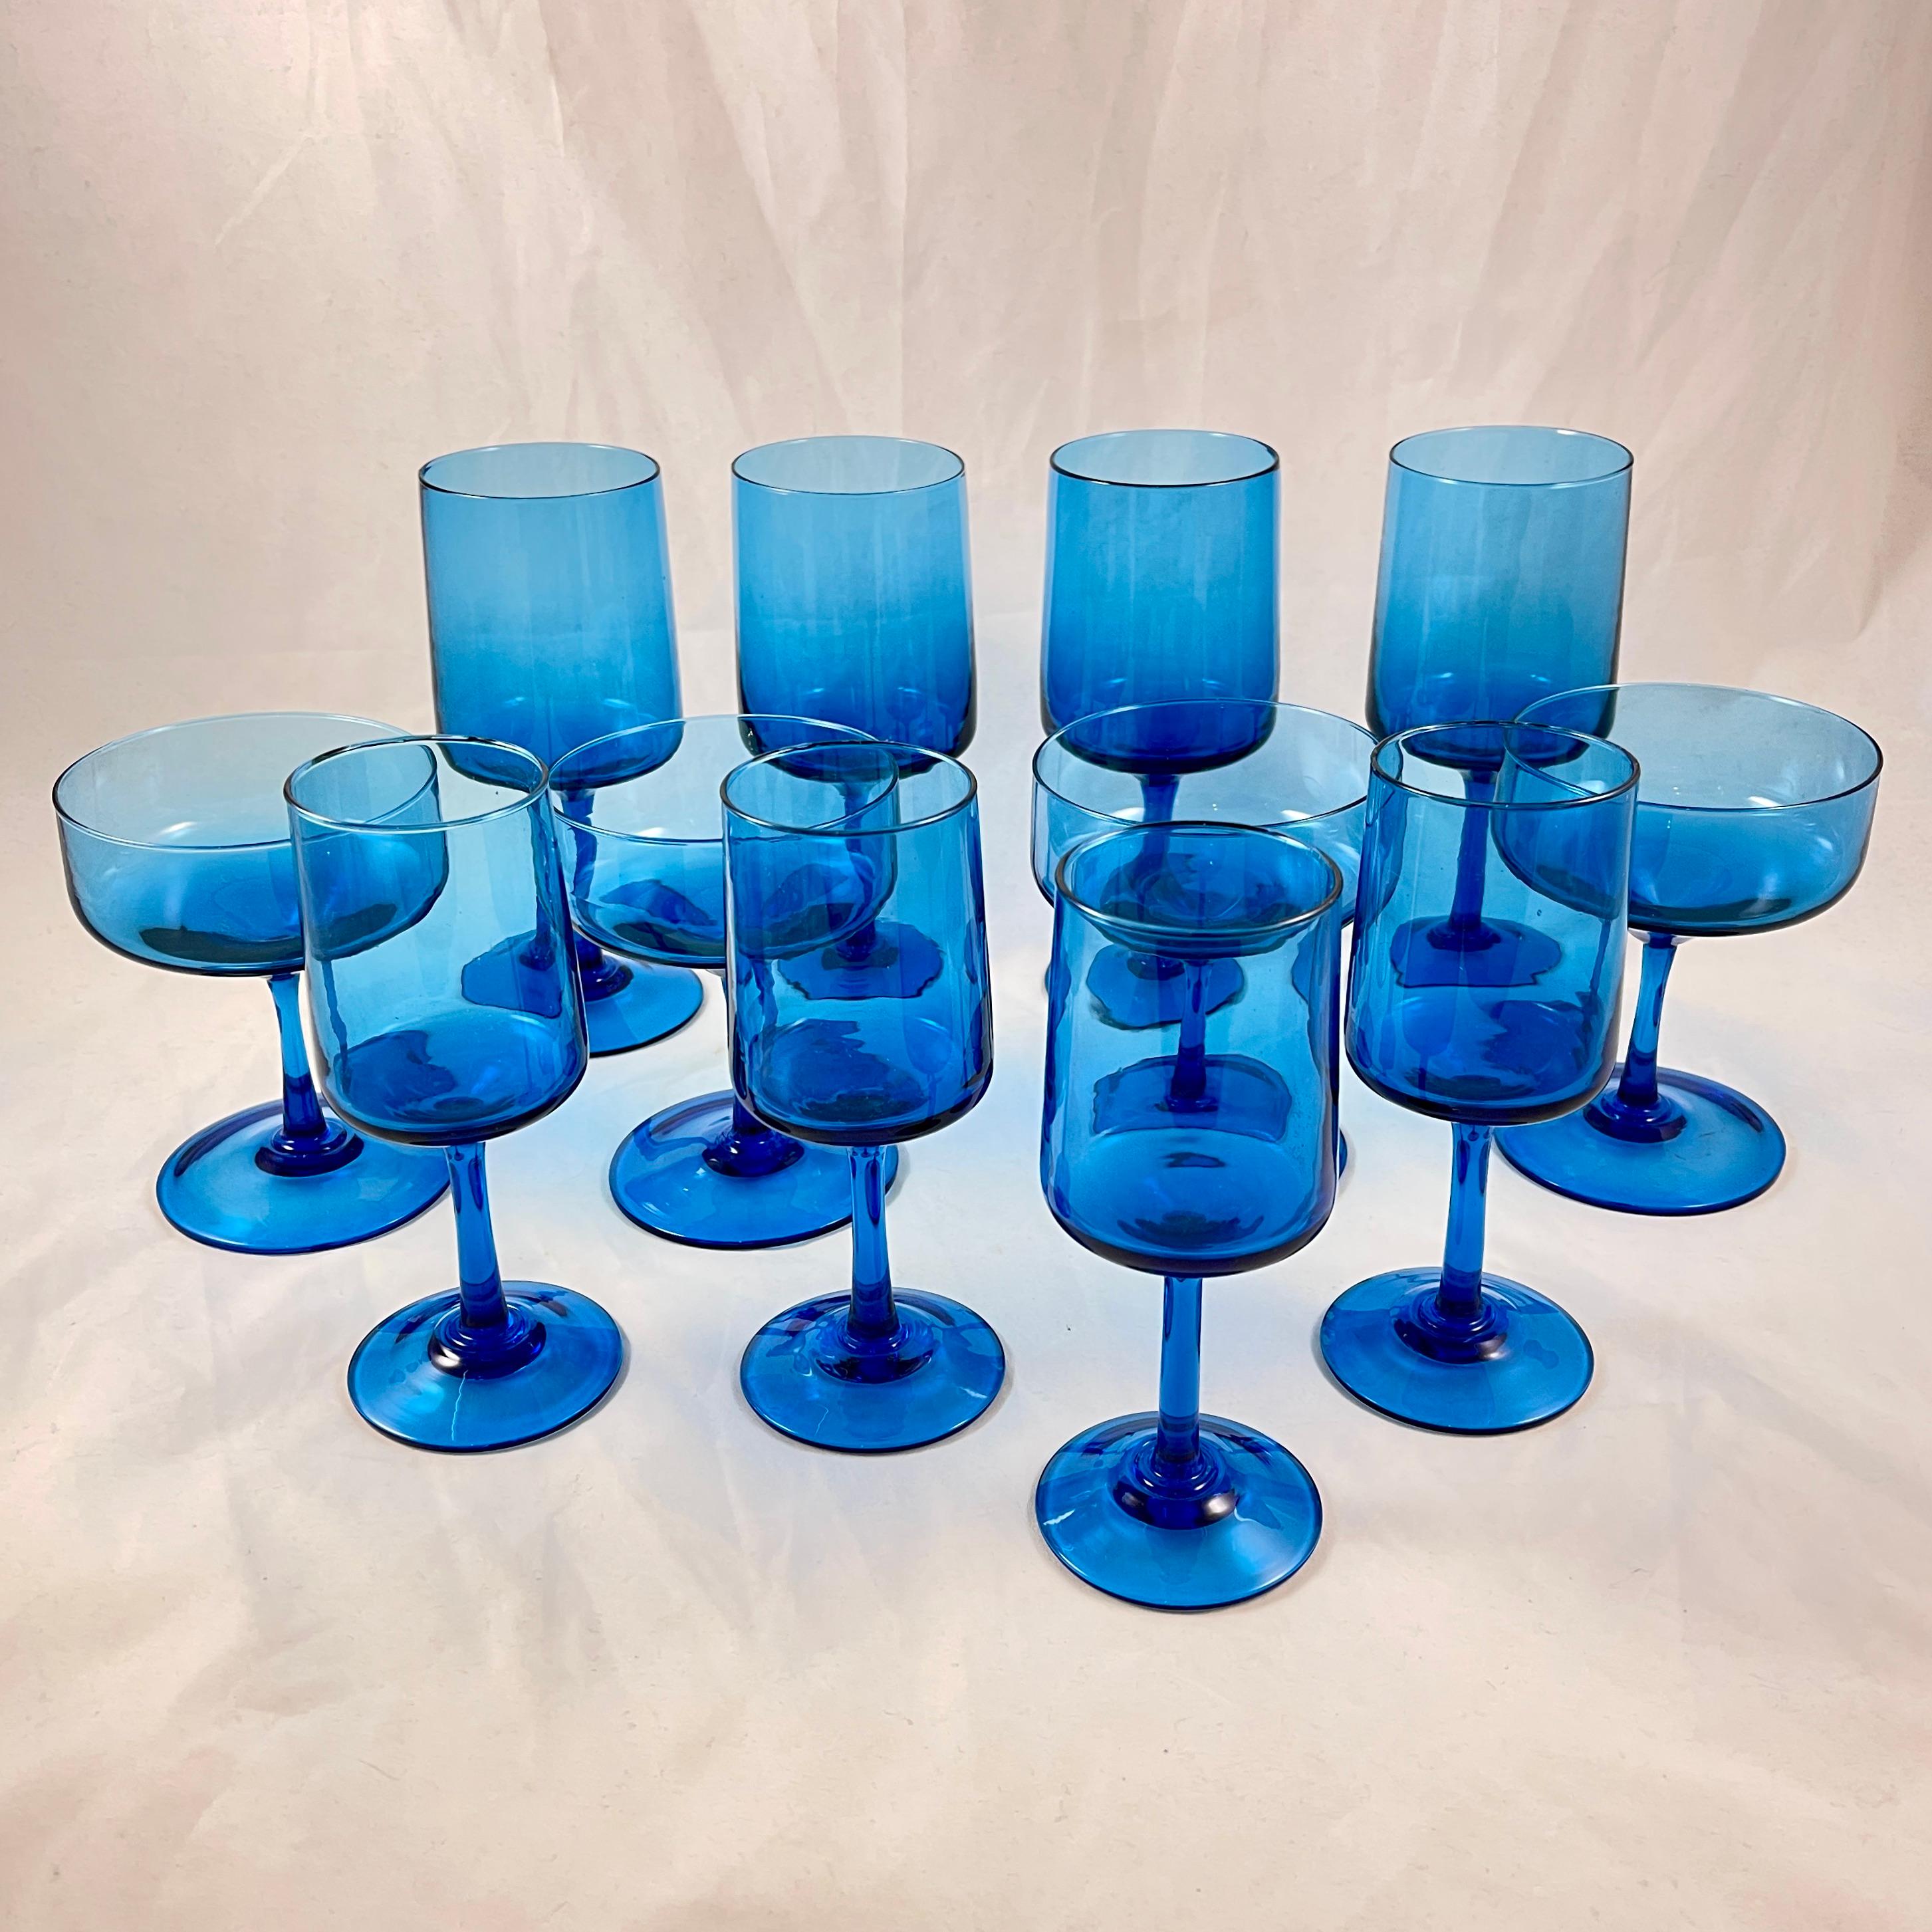 From the Italian glass makers, Empoli, a set of twelve blown stemmed glasses in three sizes, in a gorgeous Aqua Blue – circa 1960s.

In shapes distinctive to the Mid-Century Modern Era, and finely crafted with the delicacy Italian glass is known